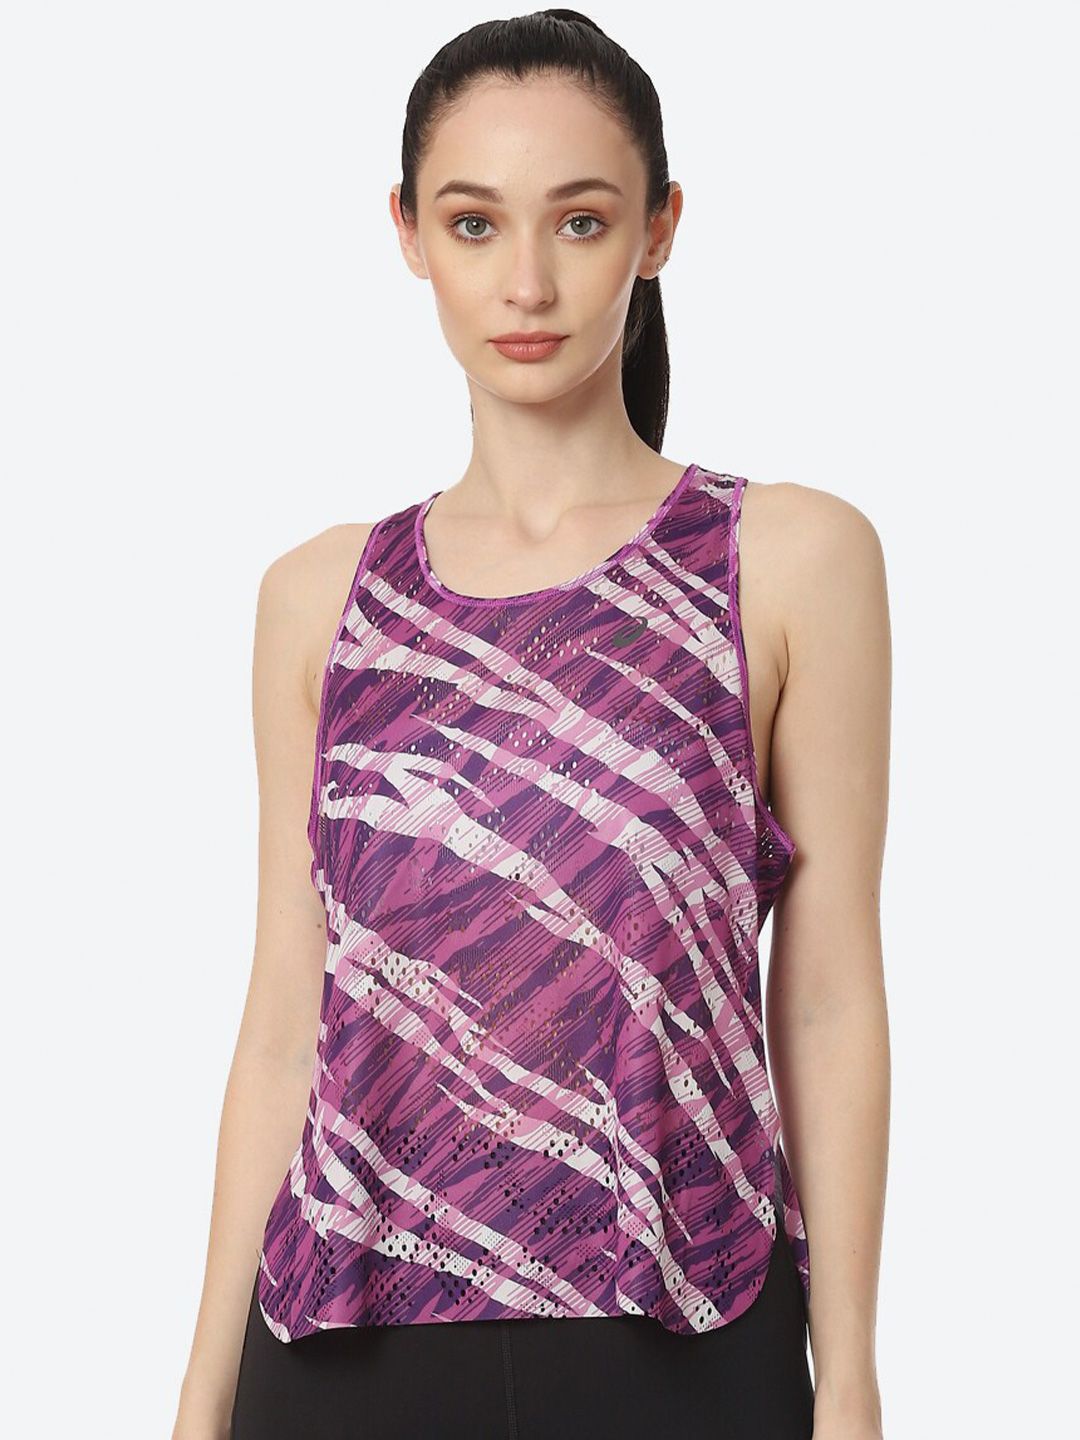 ASICS Women Violet & Off White Printed T-shirt Price in India